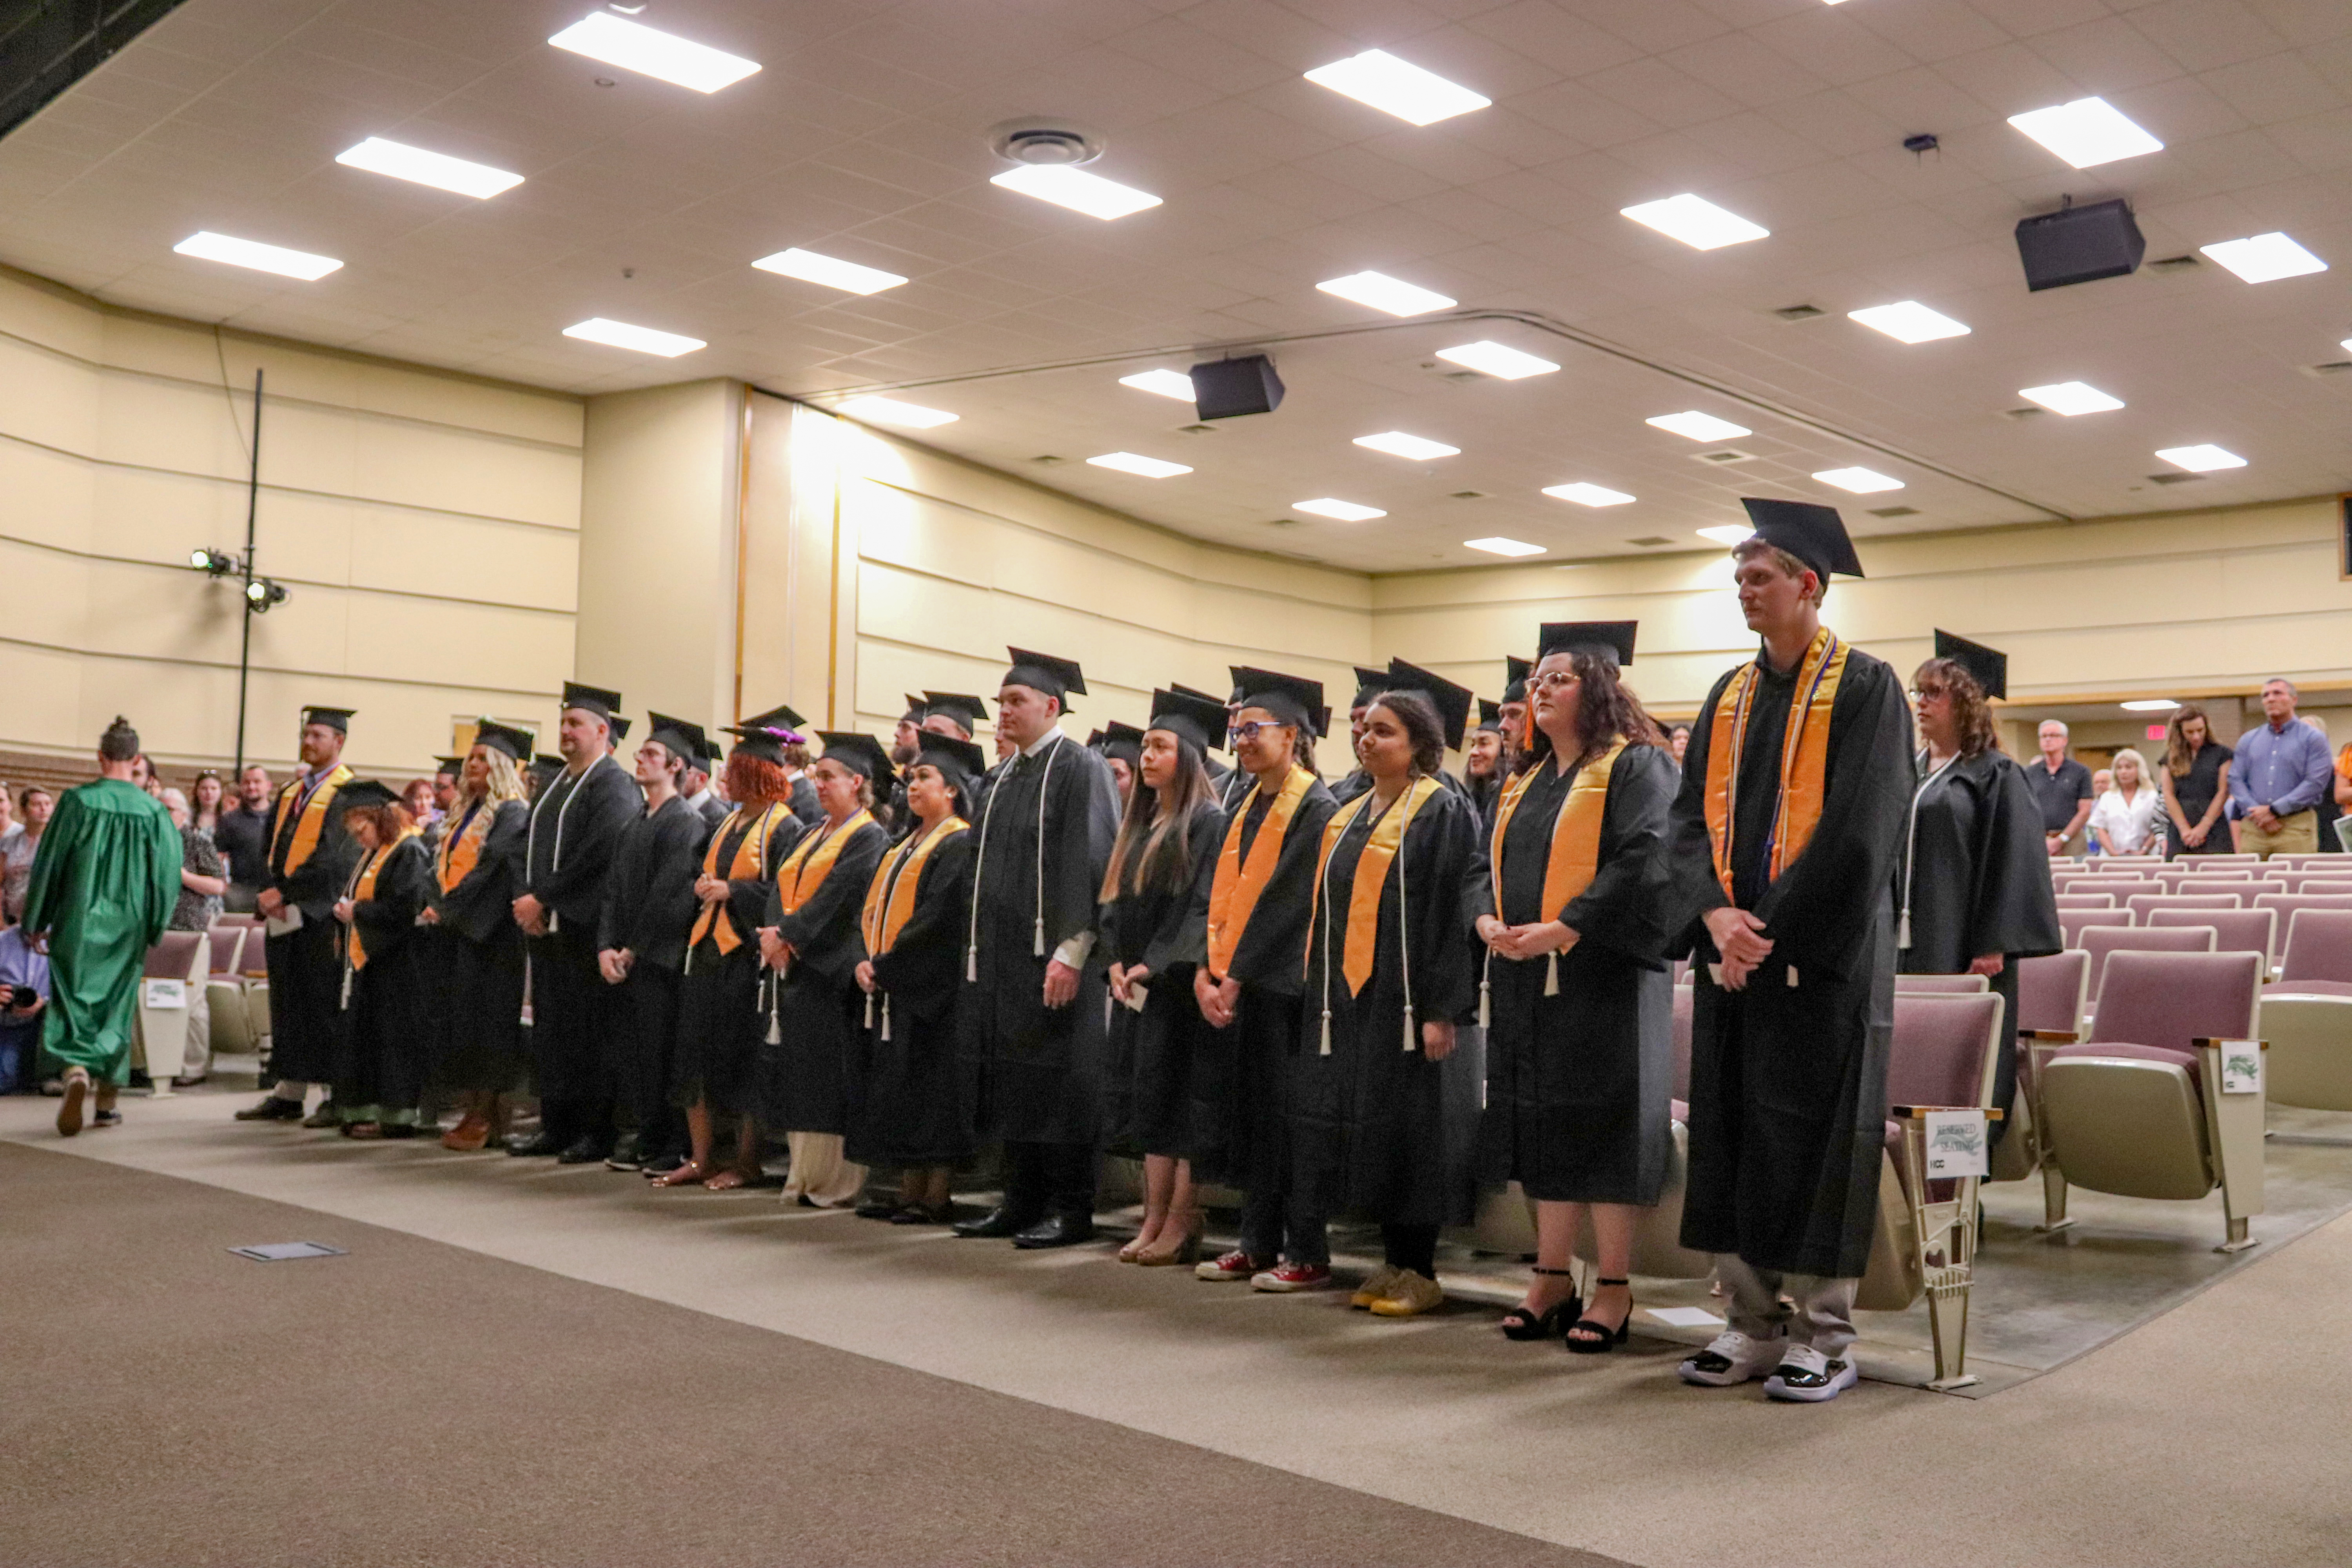 students at graduation standing with their cap and gowns on